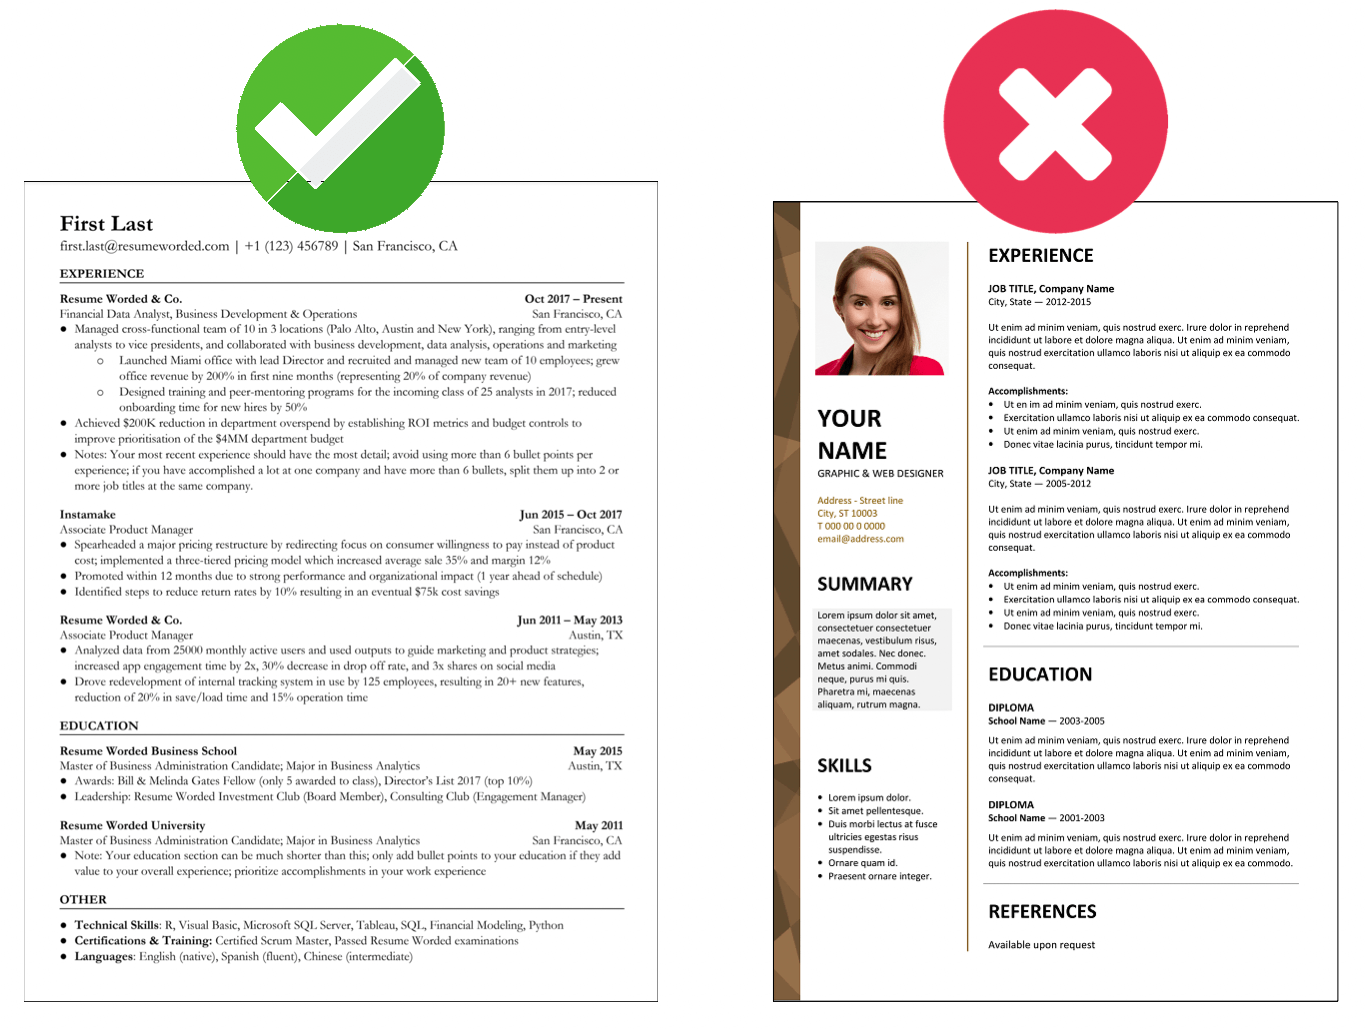 ats-friendly-resume-templates-formats-for-2022-easy-resume-riset